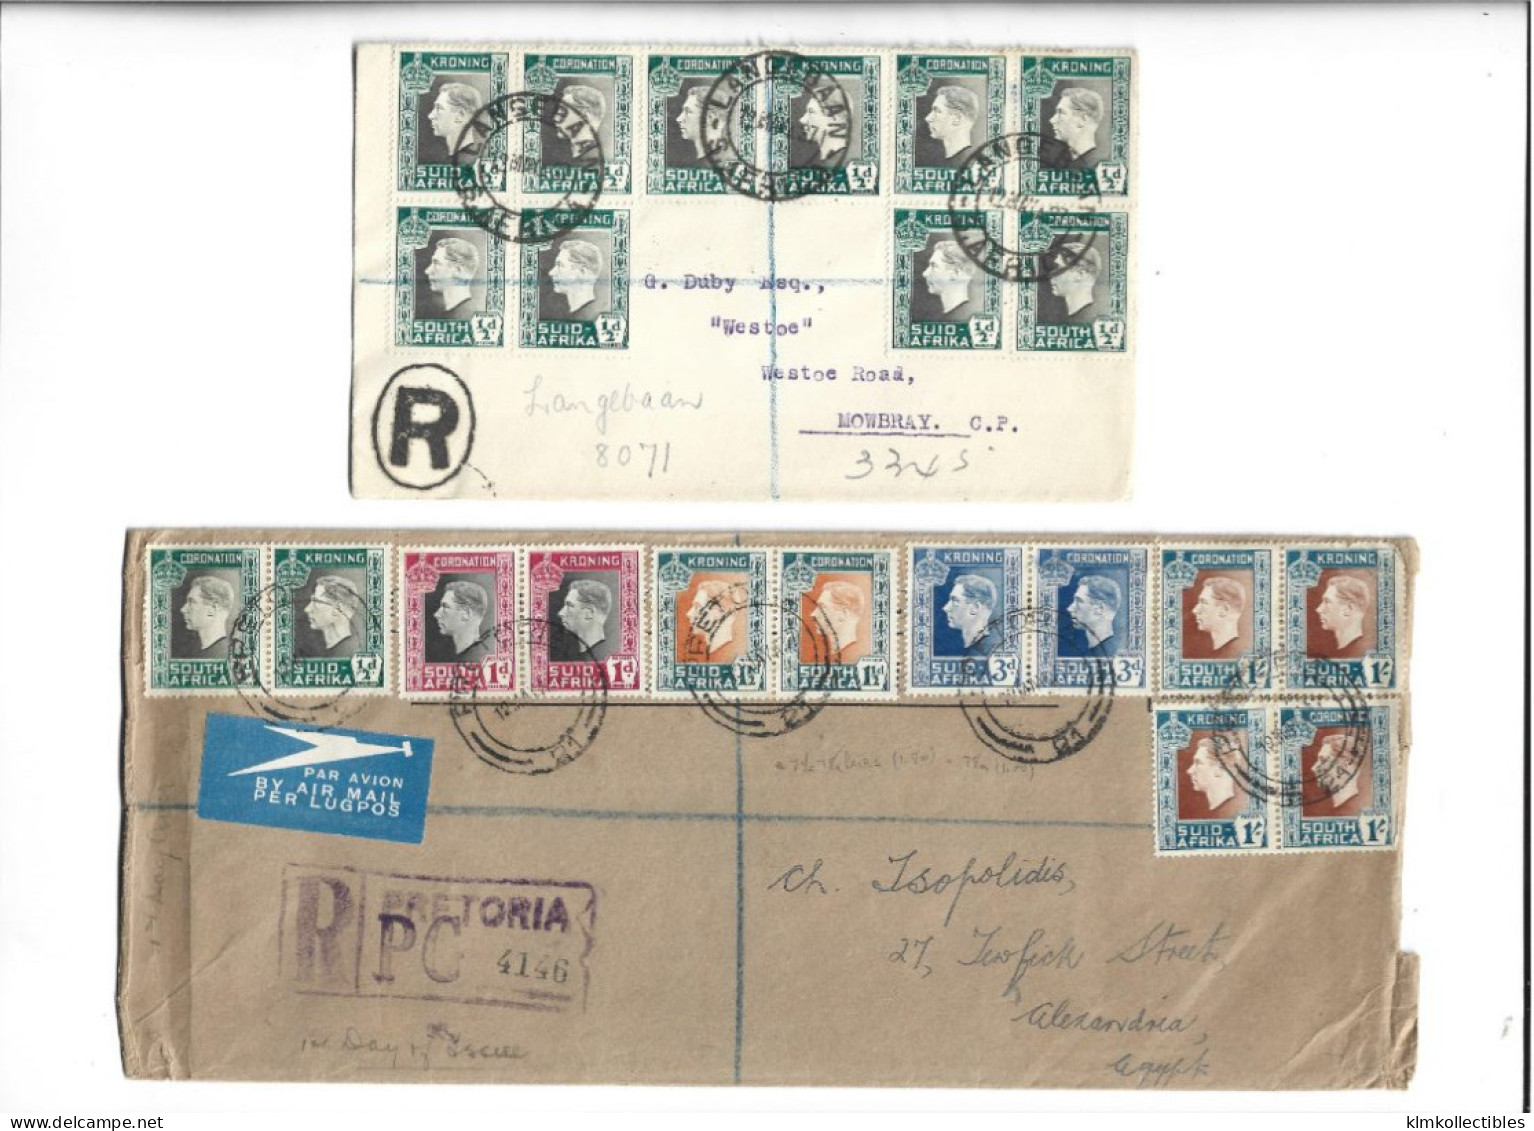 GREAT BRITAIN UNITED KINGDOM ENGLAND COLONIES - SOUTH AFRICA SUD AFRIKA -  POSTAL HISTORY LOT - Unclassified